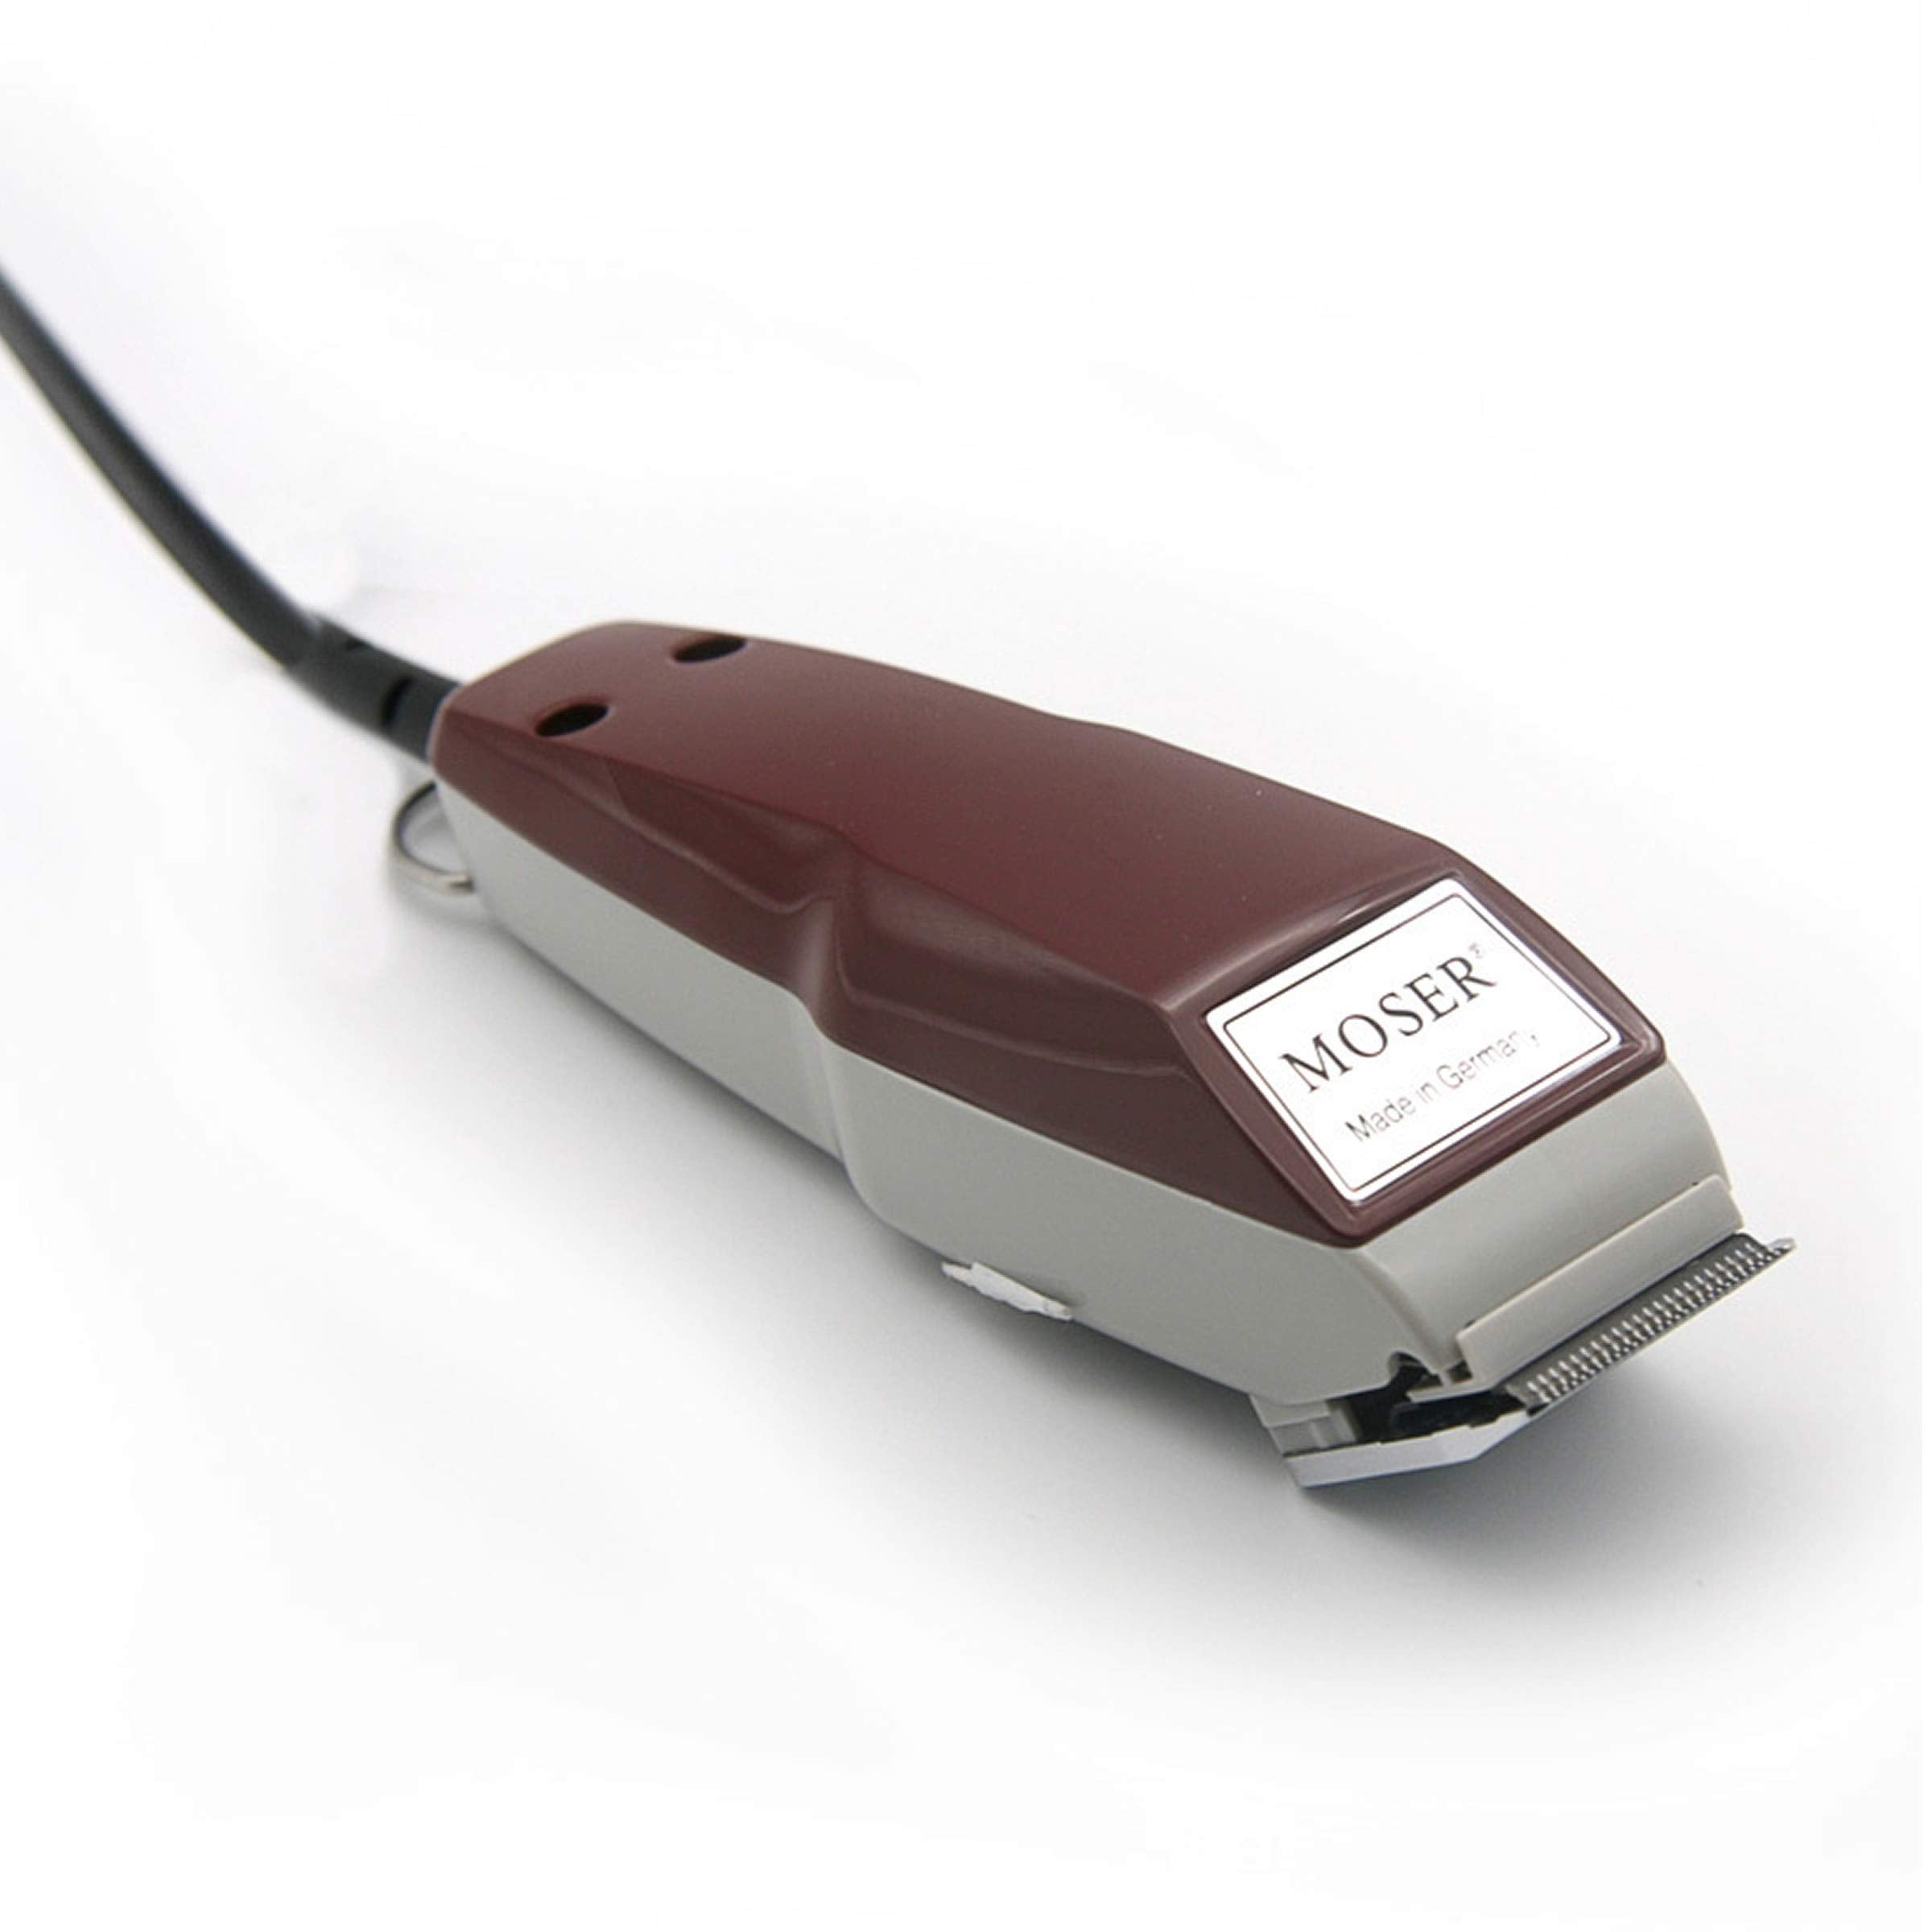 Moser 1411-0150, 1400 Mini Professional Corded Trimmer, Burgundy, Small